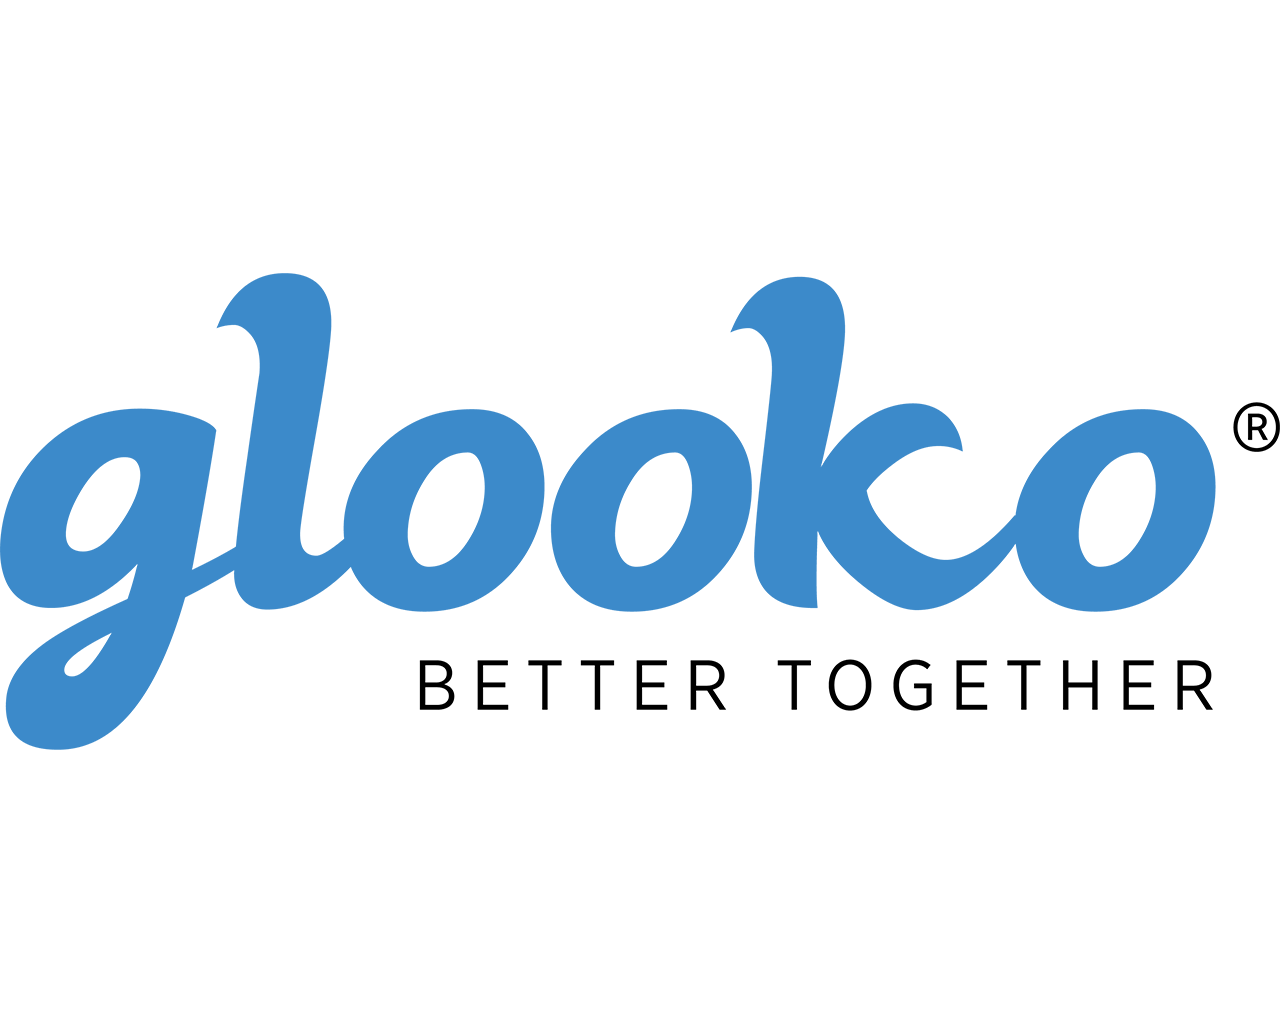 Collaboration with Glooko